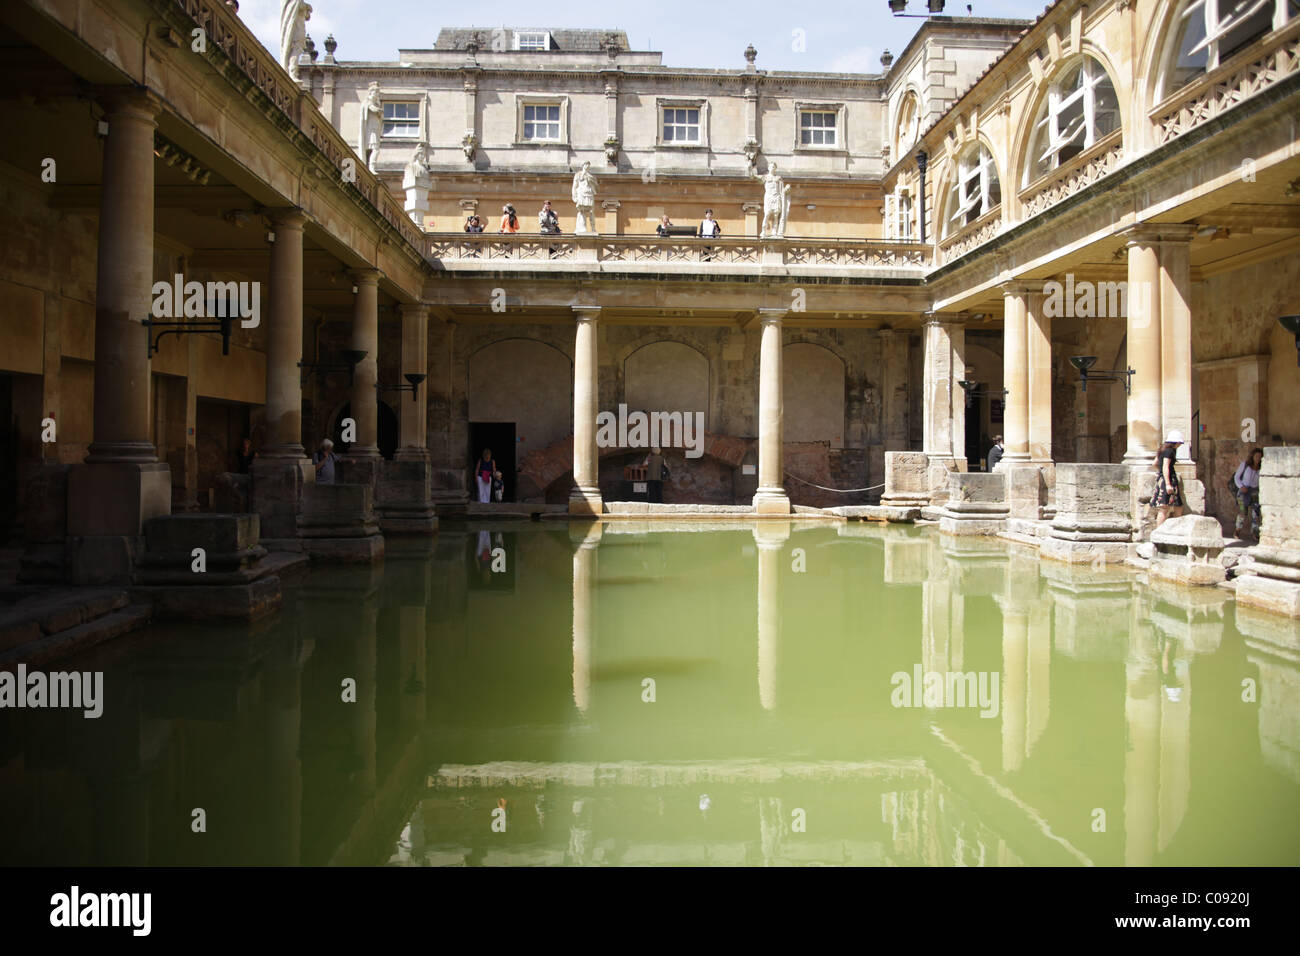 People at the Roman Baths in Bath, England Stock Photo